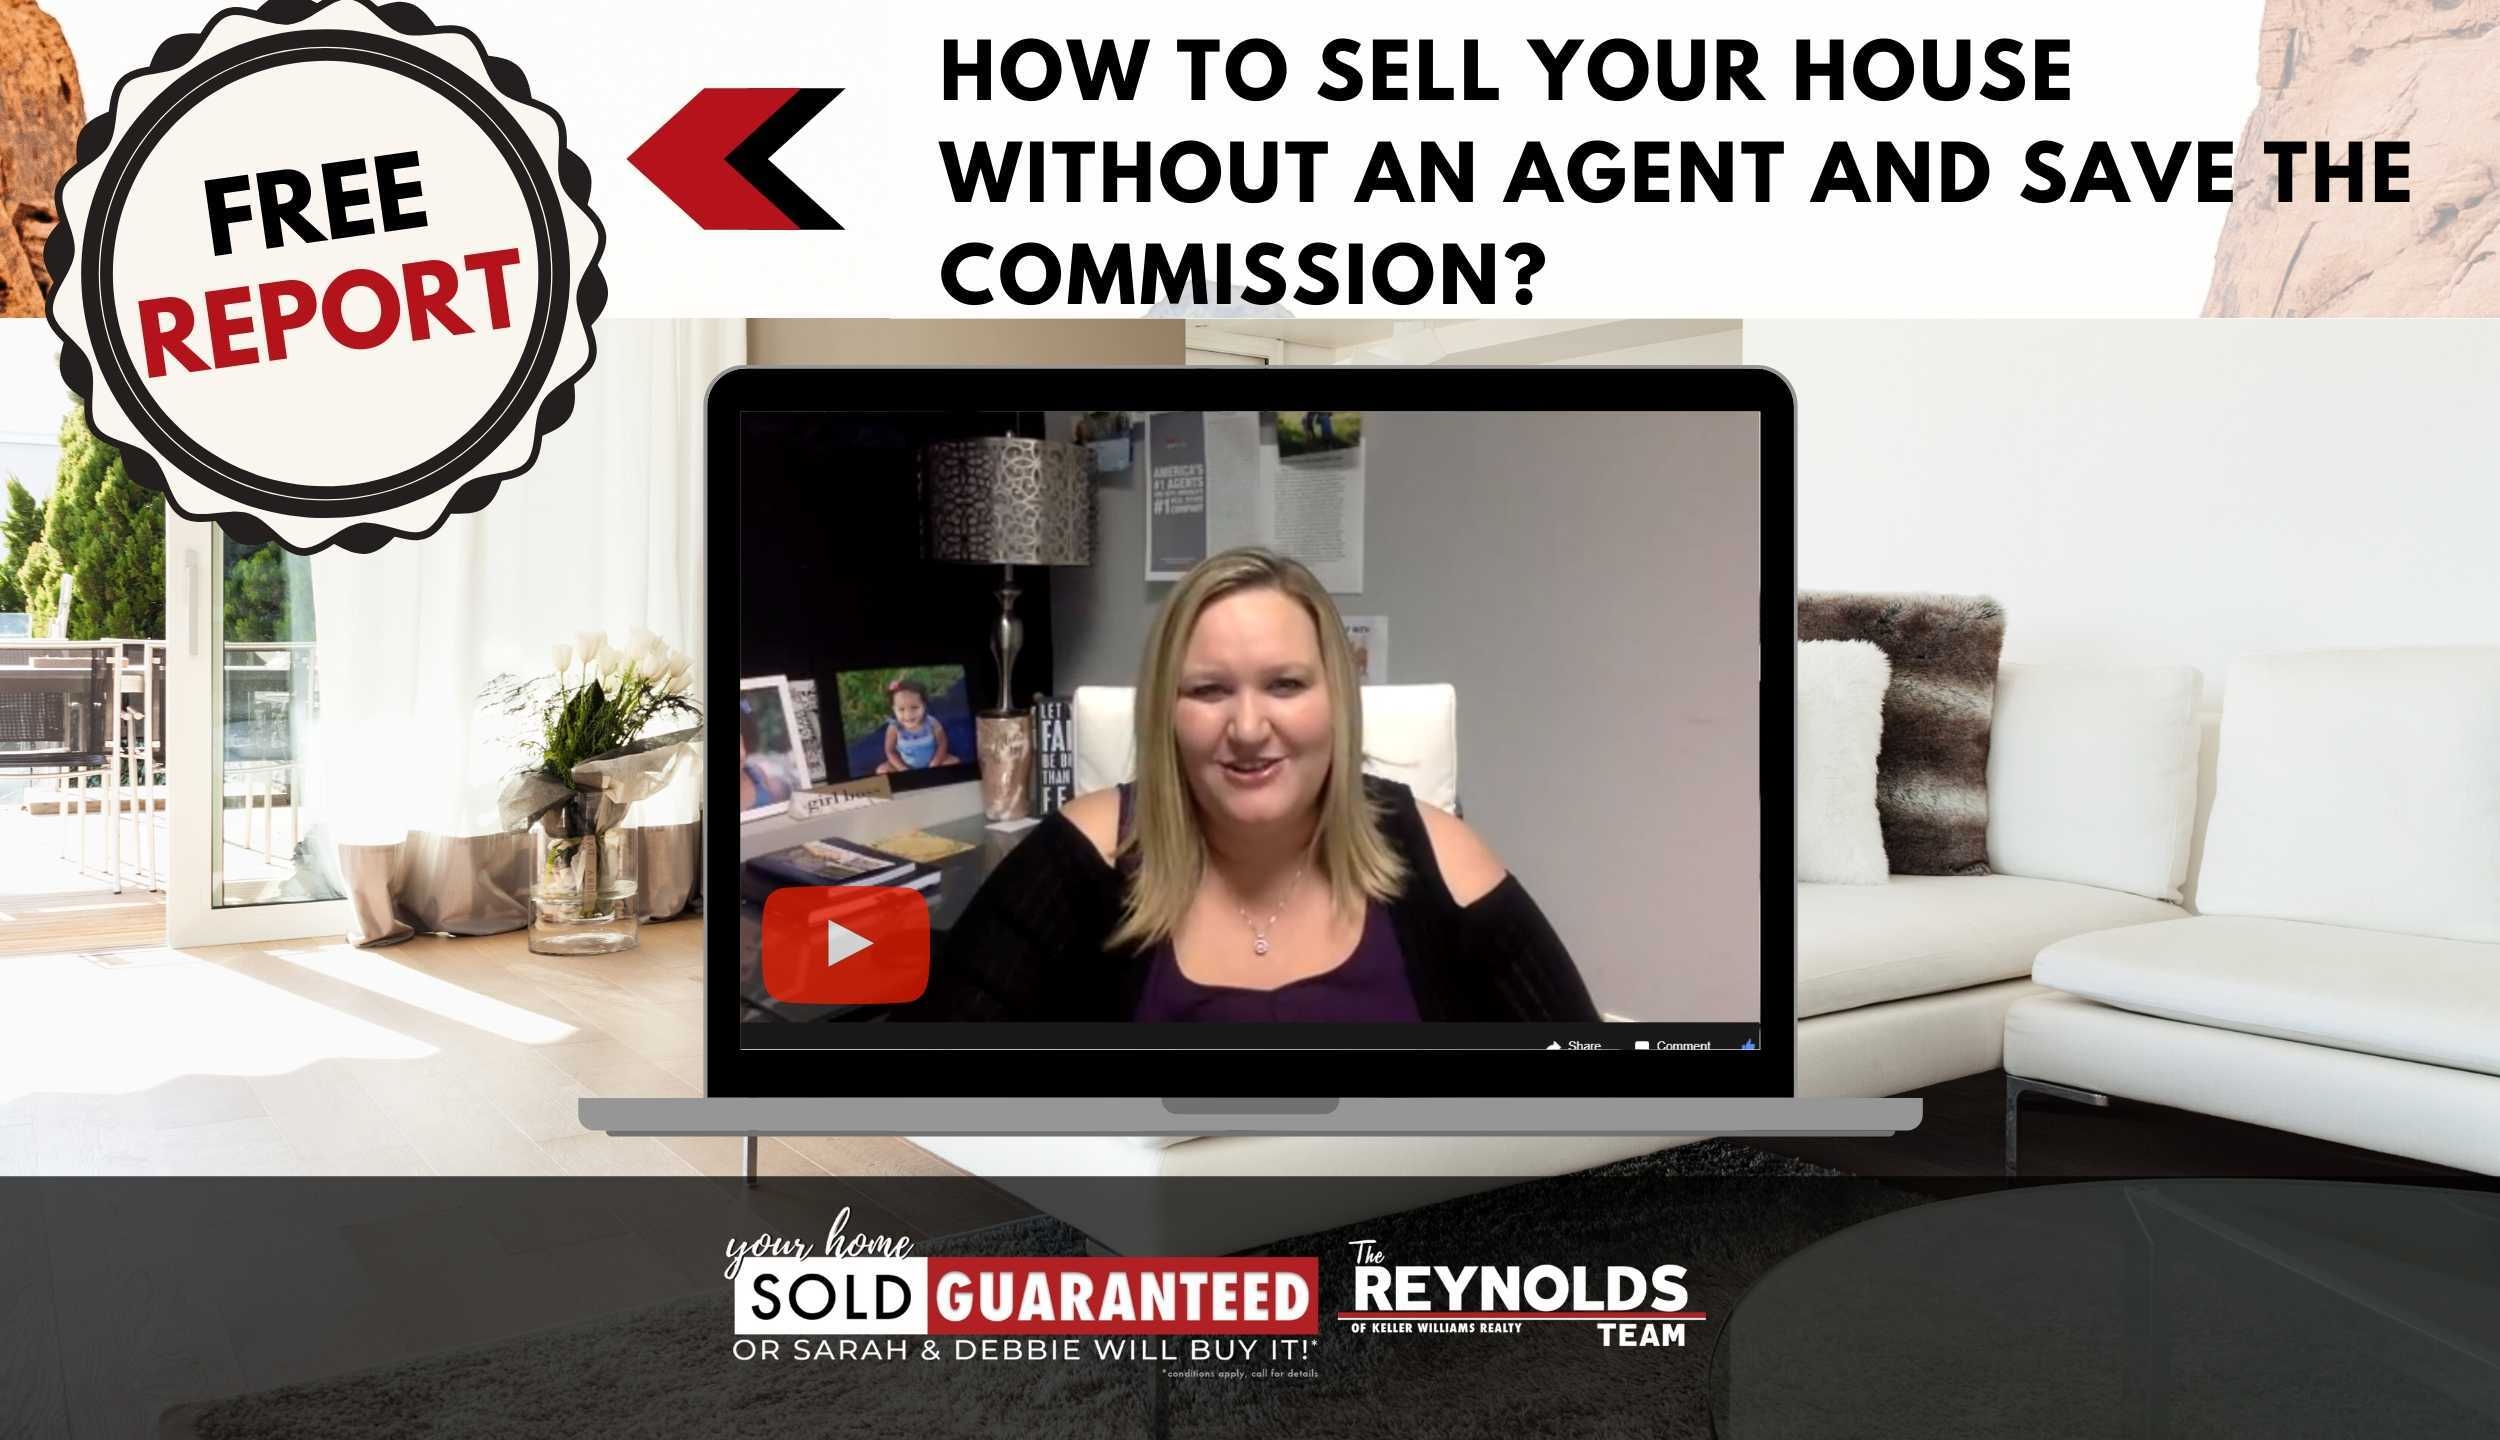 How to Sell Your House Without An Agent And Save the Commission?